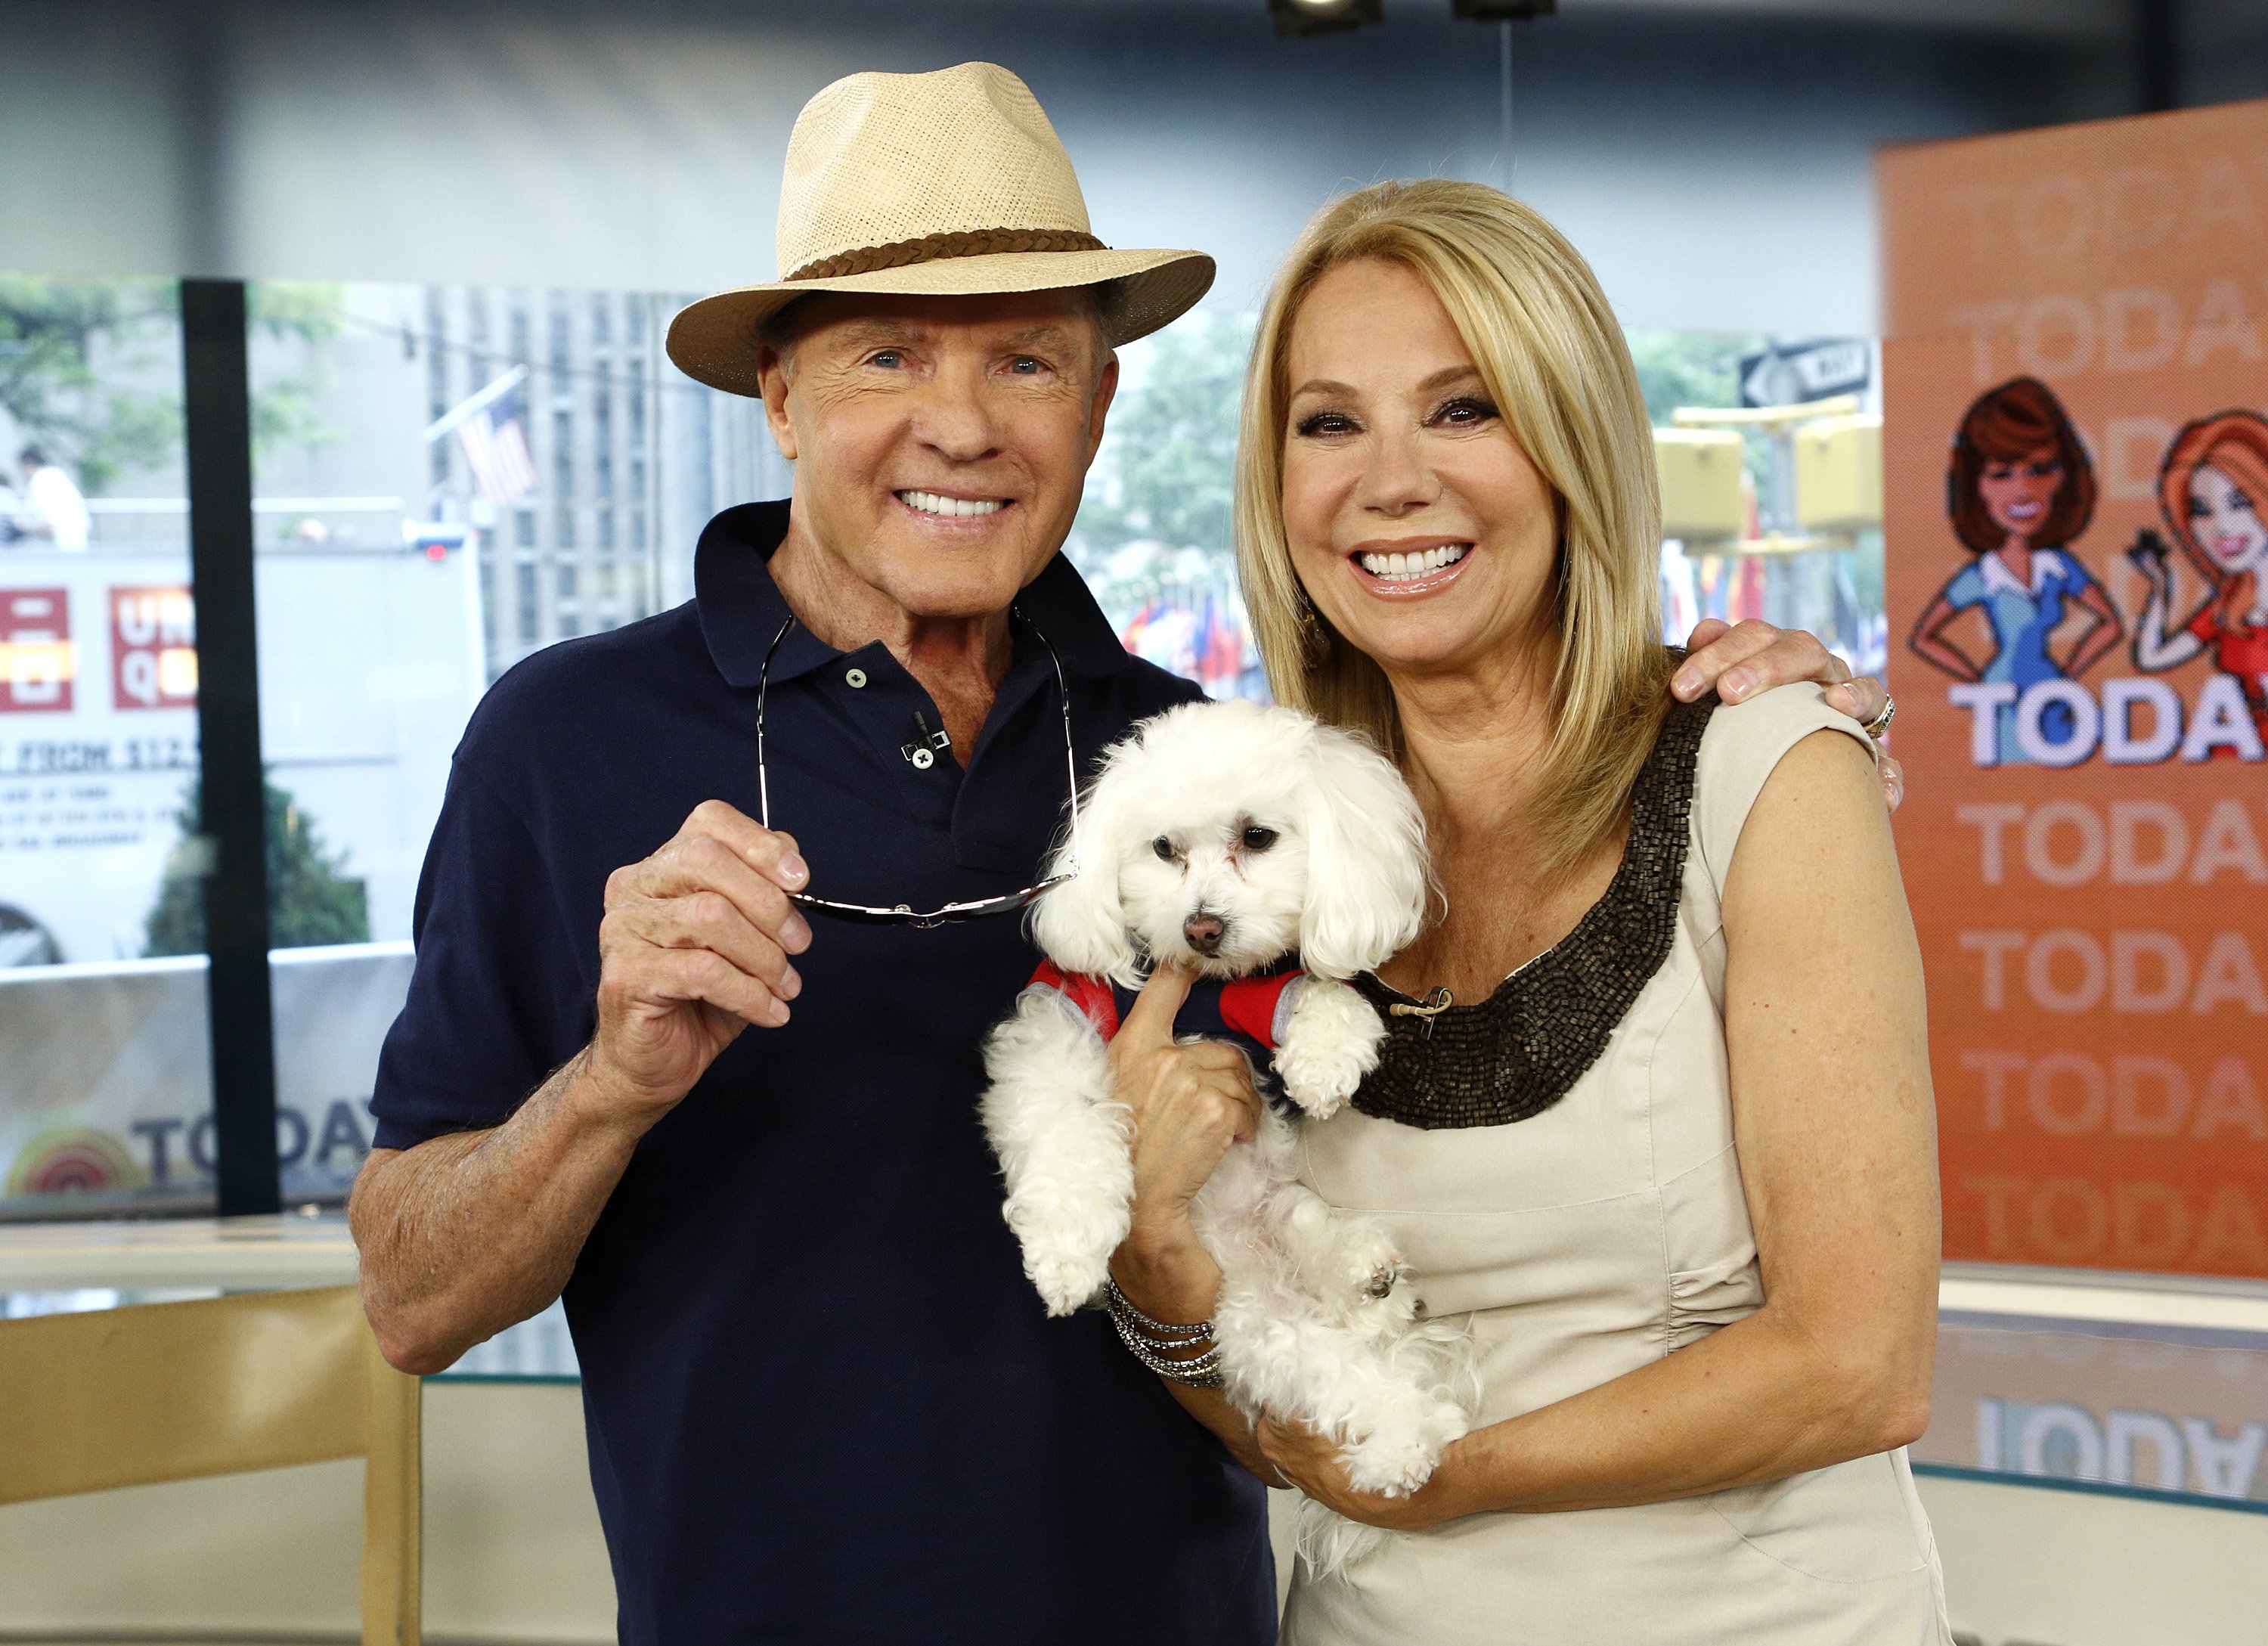 Frank and Kathie Lee Gifford appear on the "Today" show on June 12, 2012 | Source: Getty Images